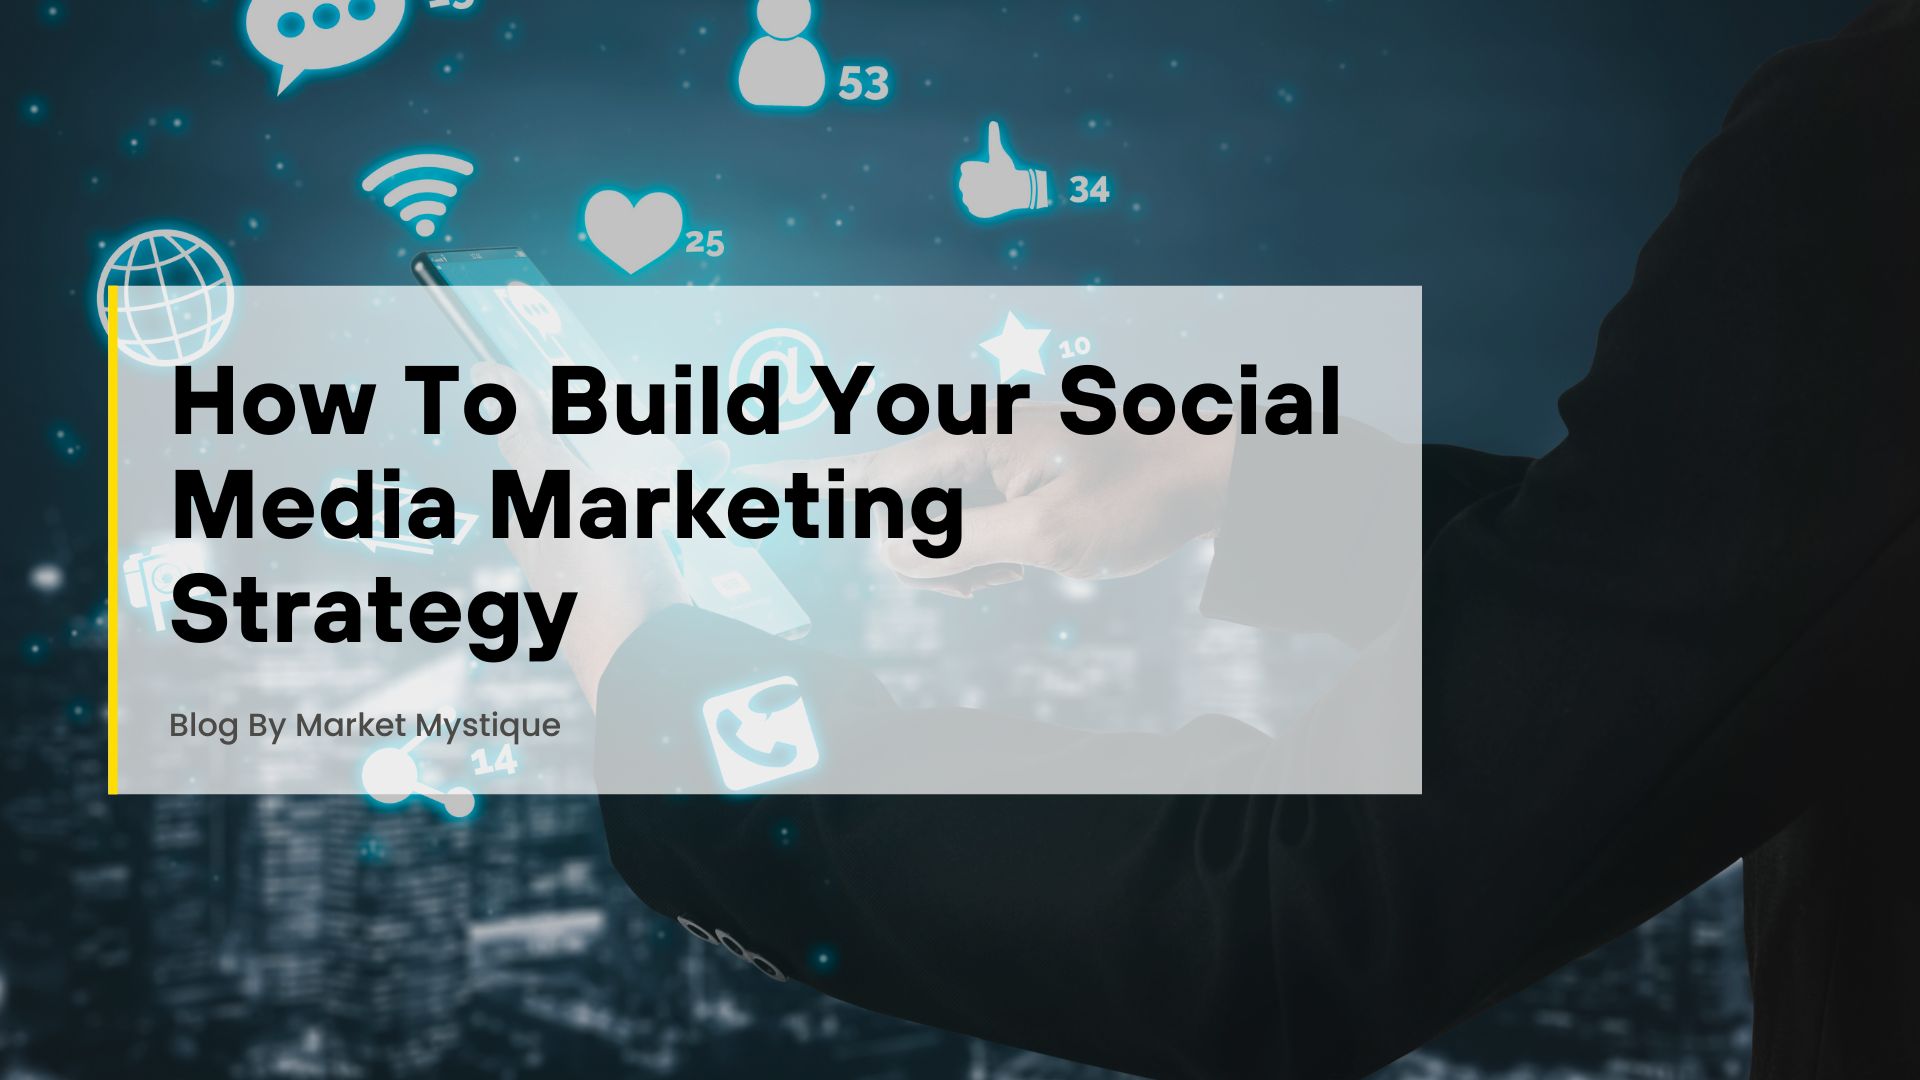 How To Build Your Social Media Marketing Strategy